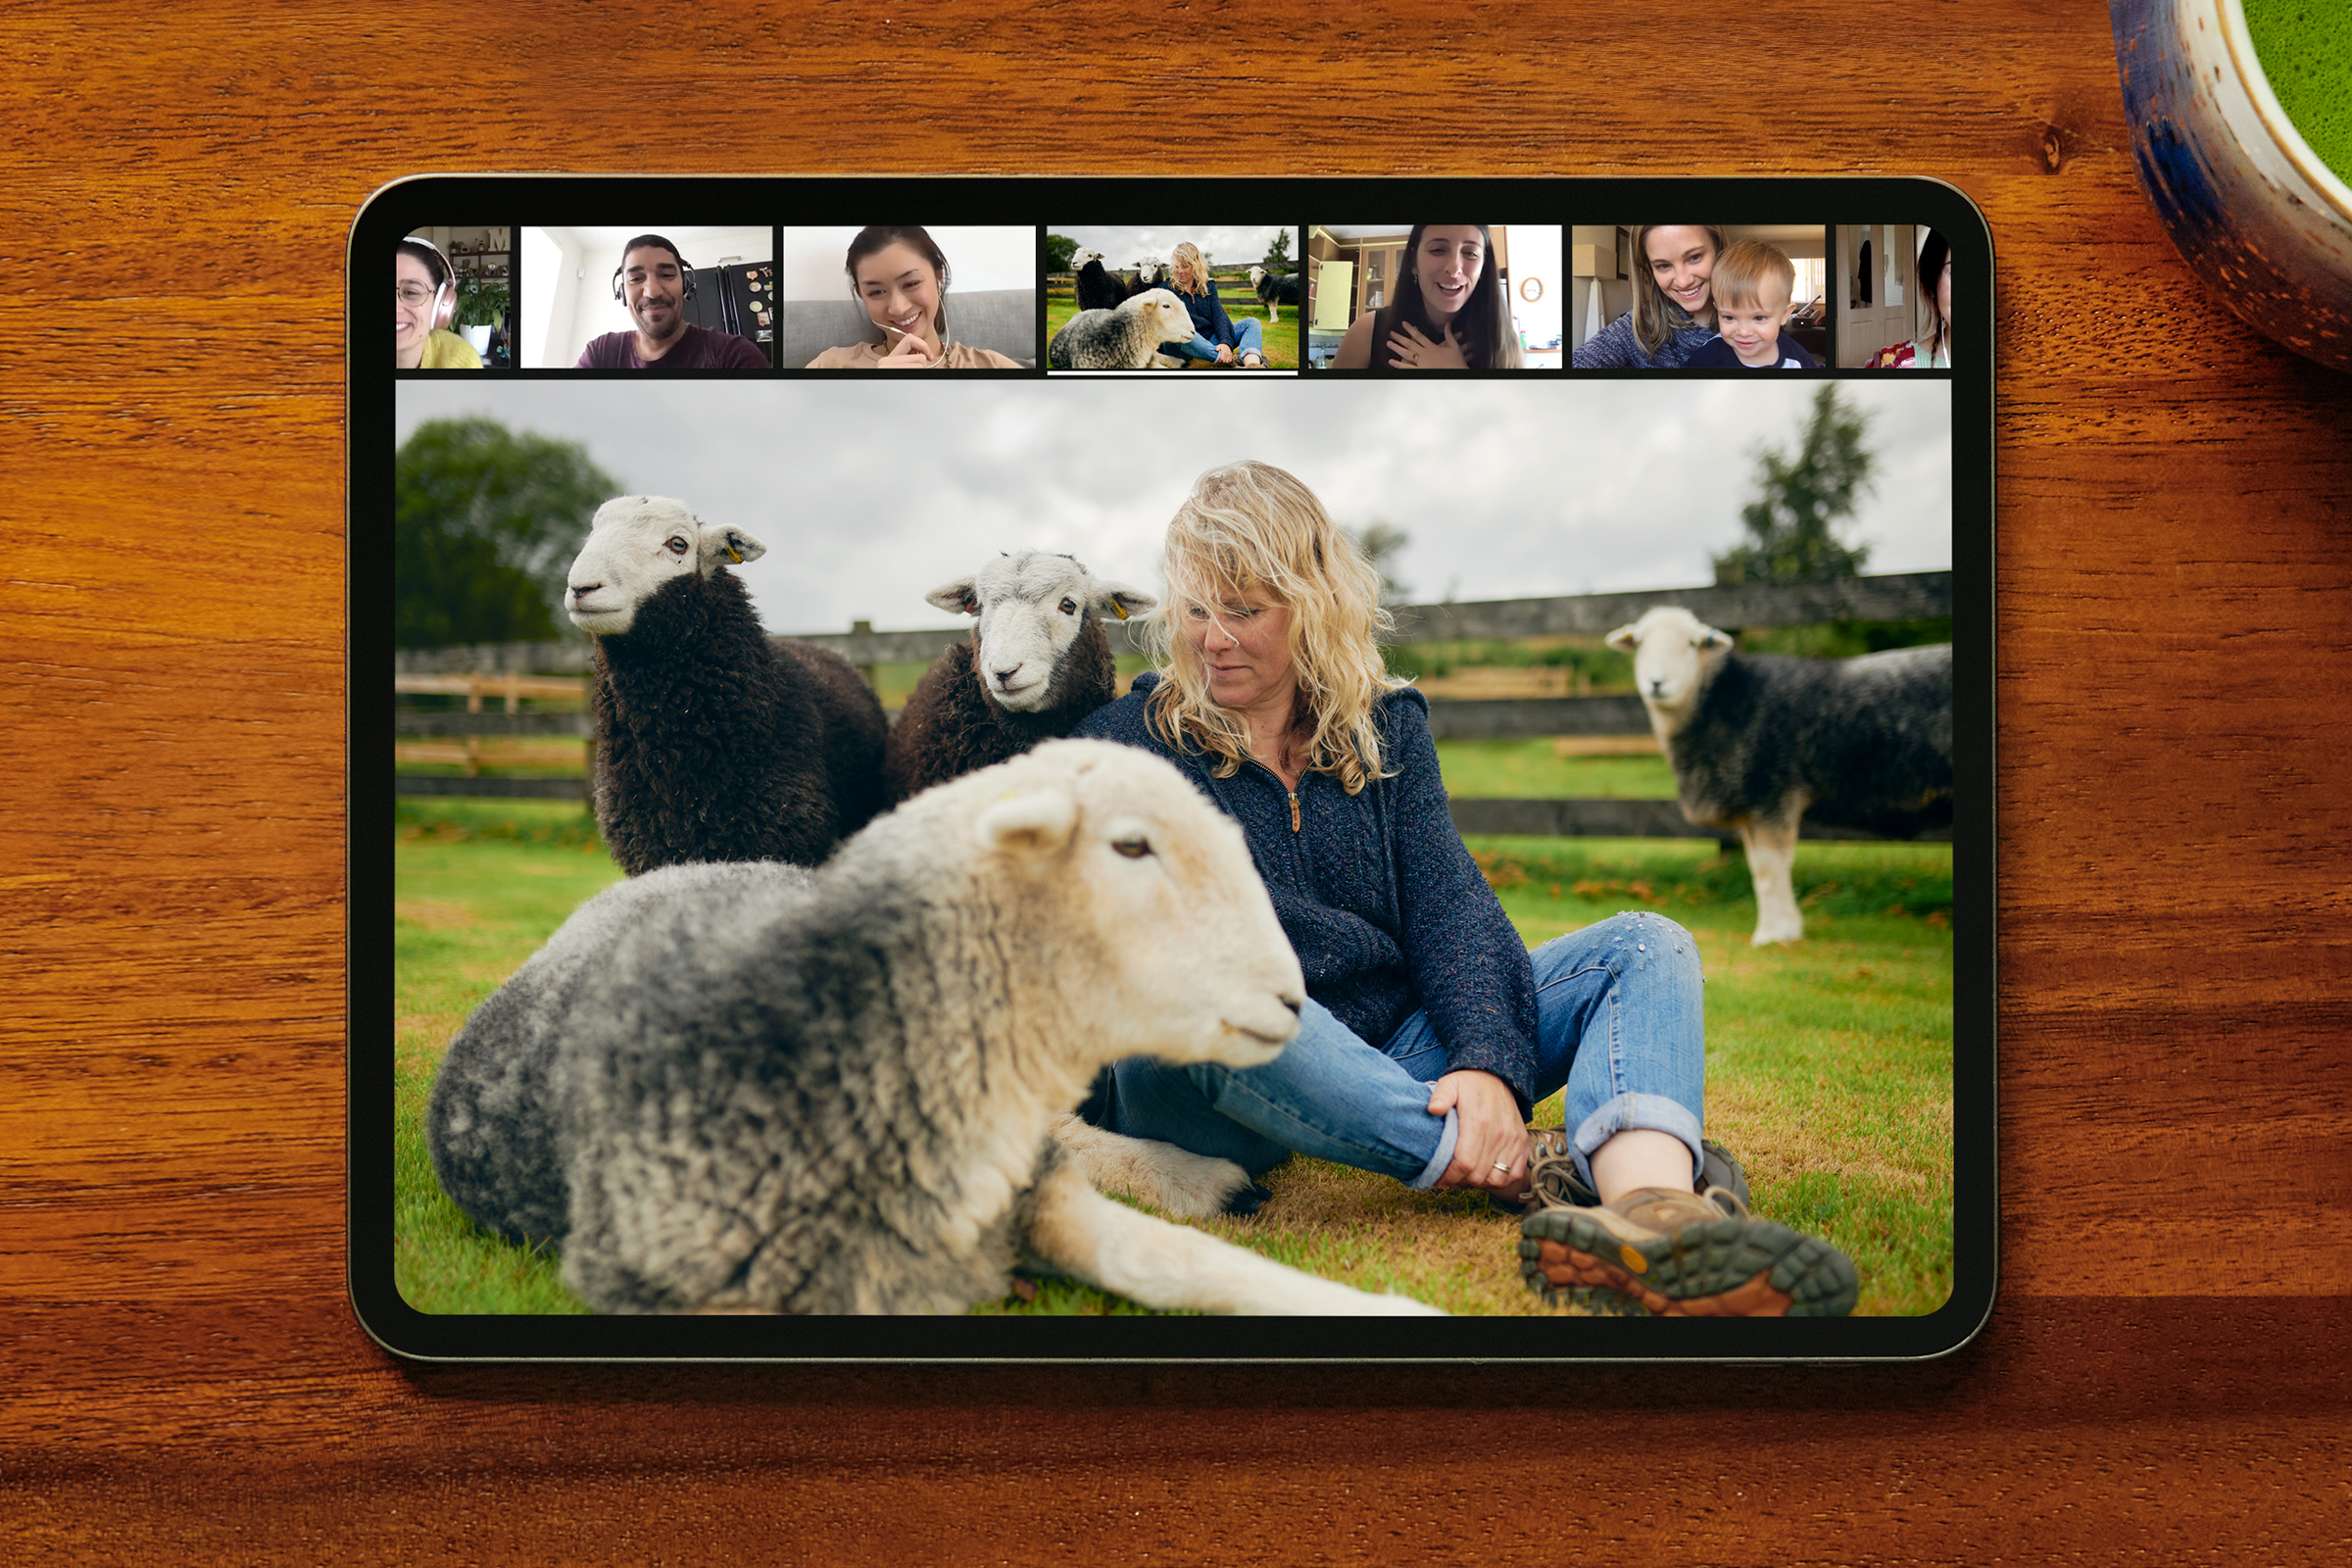 Ah Airbnb hosts introduces her guests to her farm's sleepy sheep during an Airbnb Online Experience.